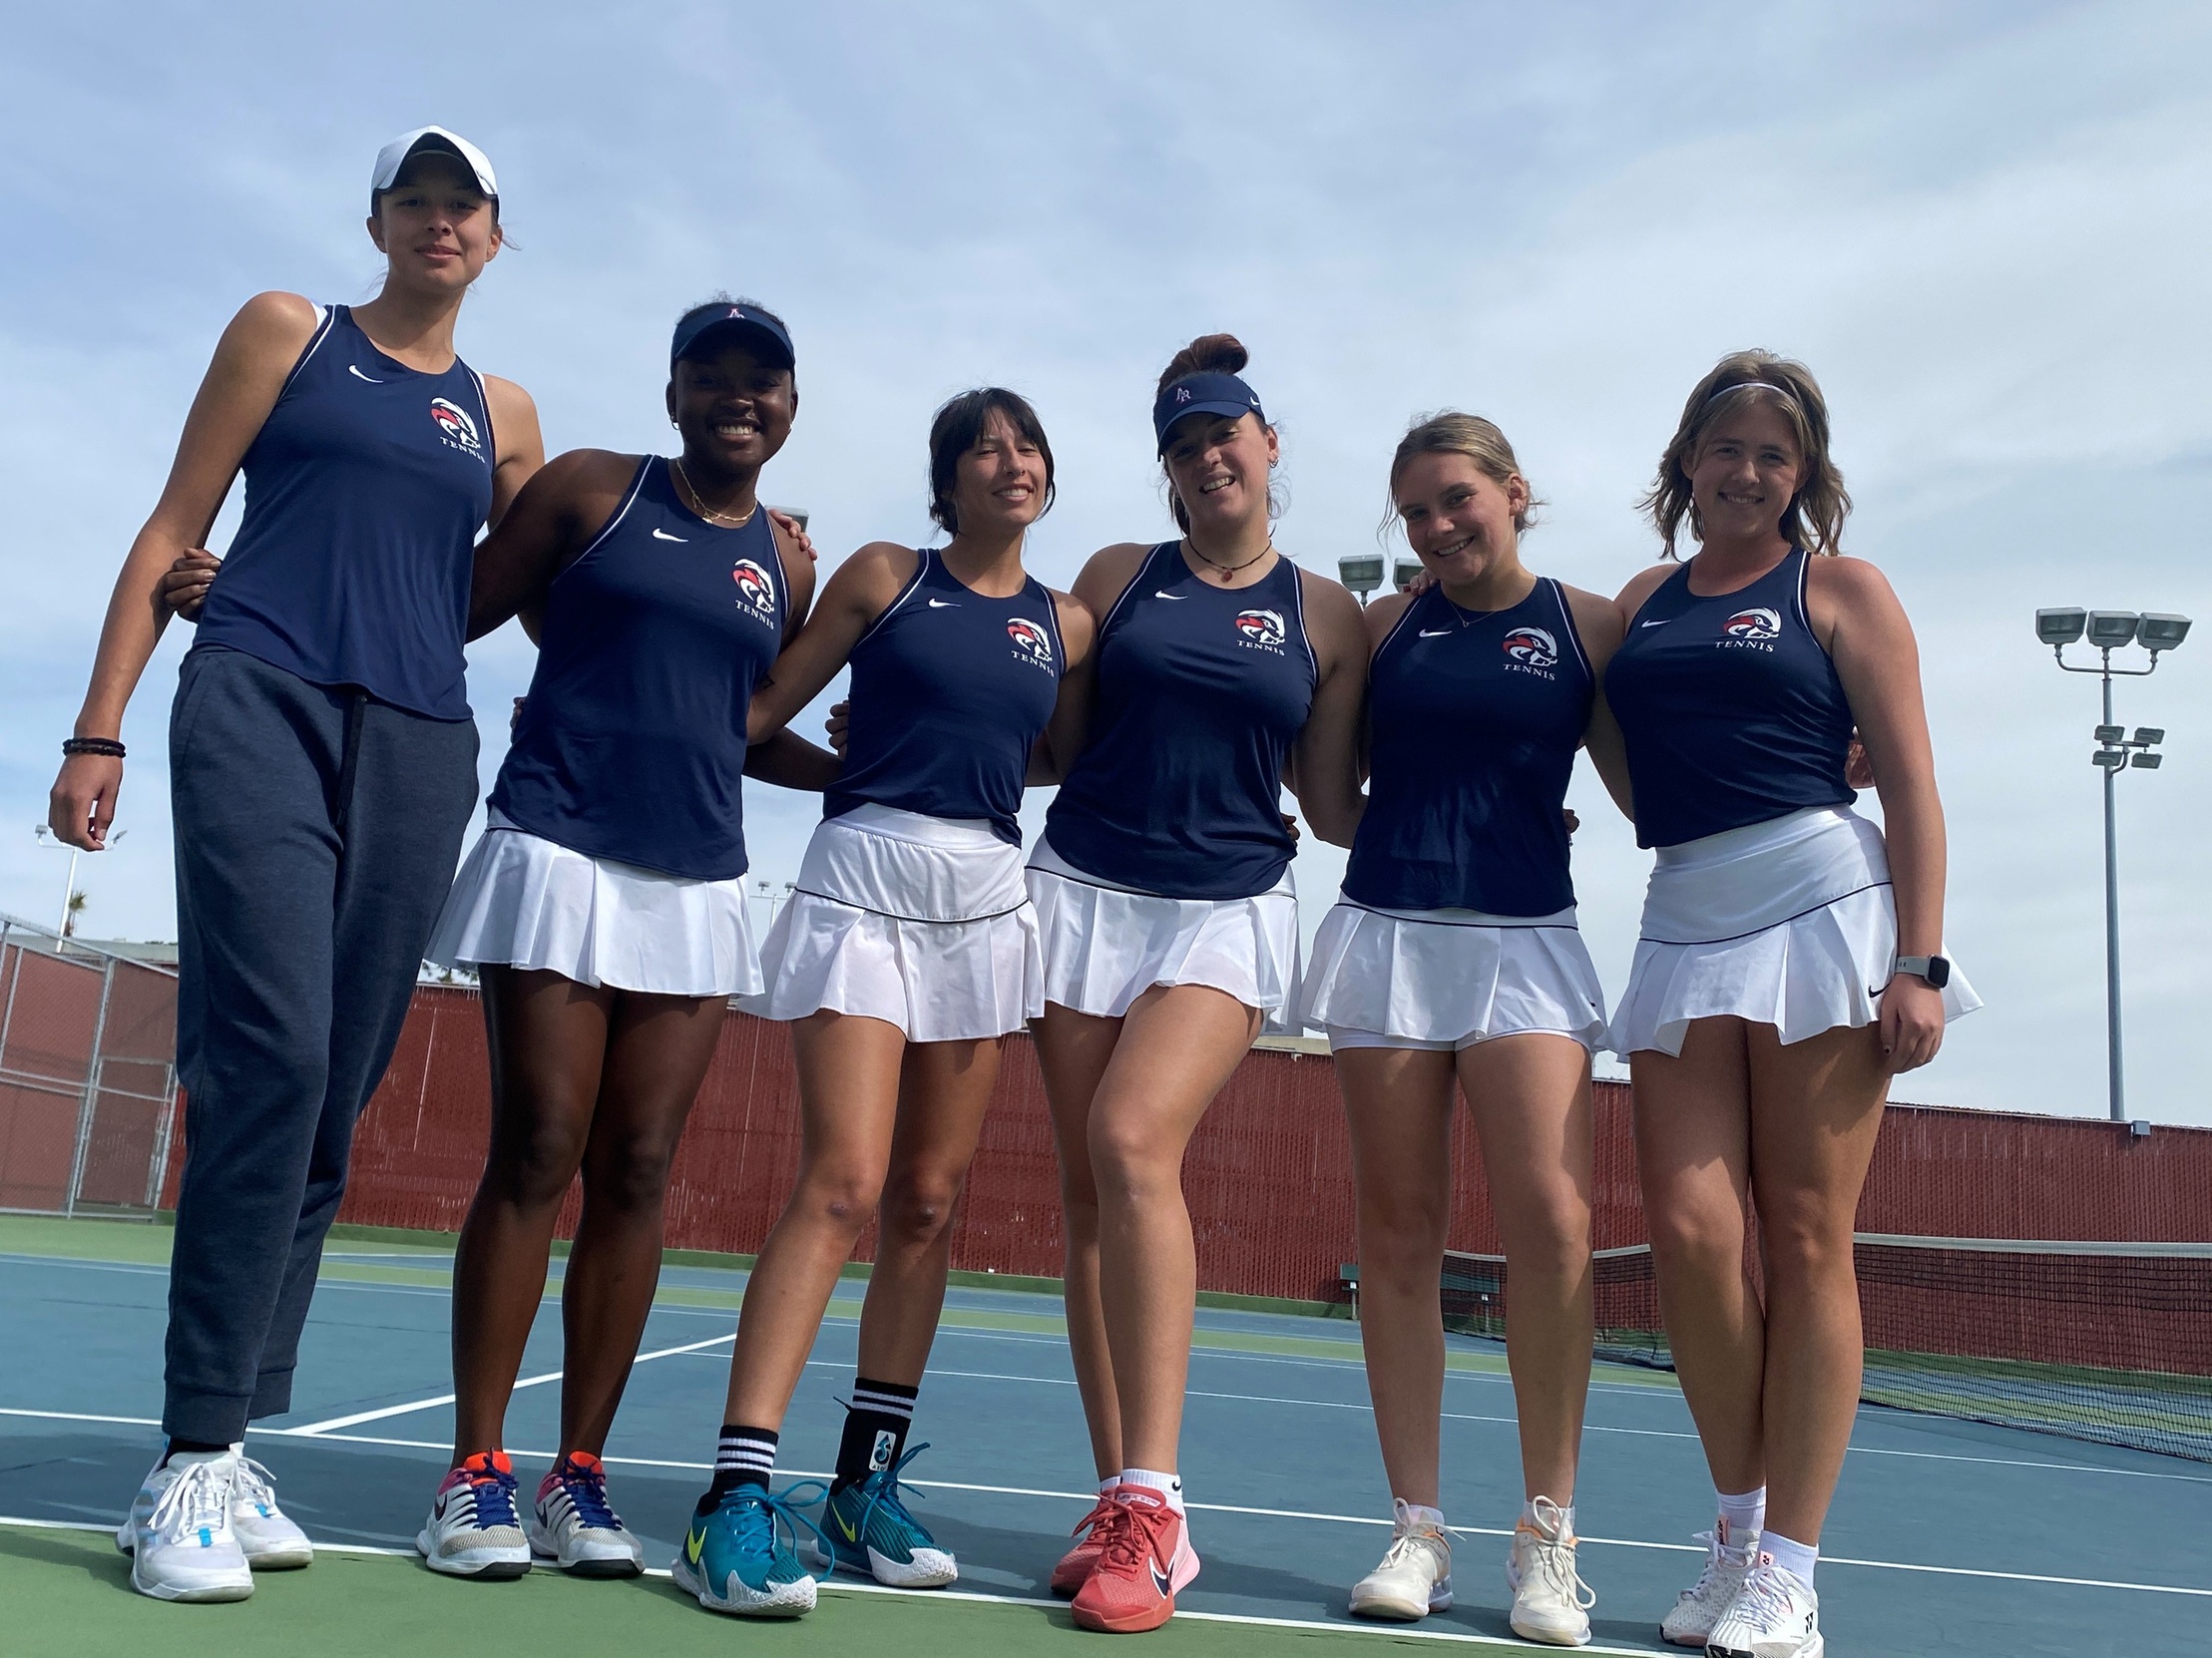 Women's Tennis Weekend Road Trip Includes Victory Over SoCal Top Seed